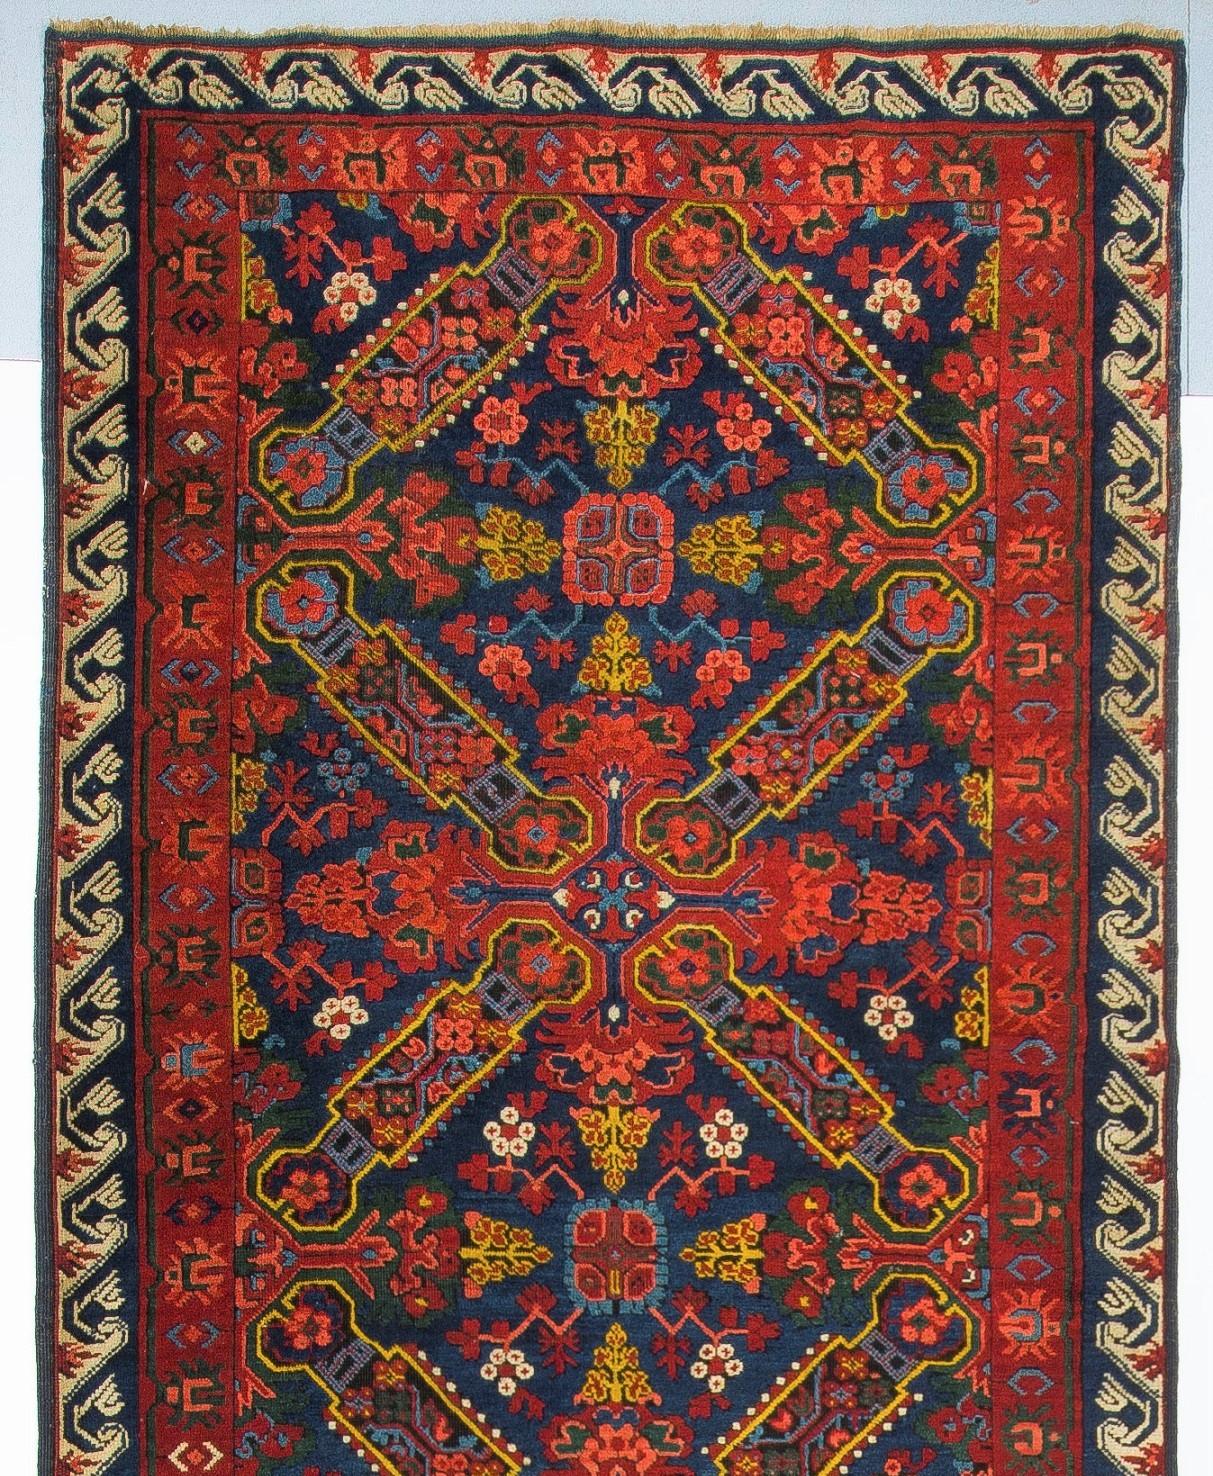 A beautifully preserved antique Seychour rug, from a highly sought after family of rugs from the Kuba region of Azerbaijan, hand-knotted in the 19th century. It features prominent, elaborate St Andrews crosses across its field, which is a